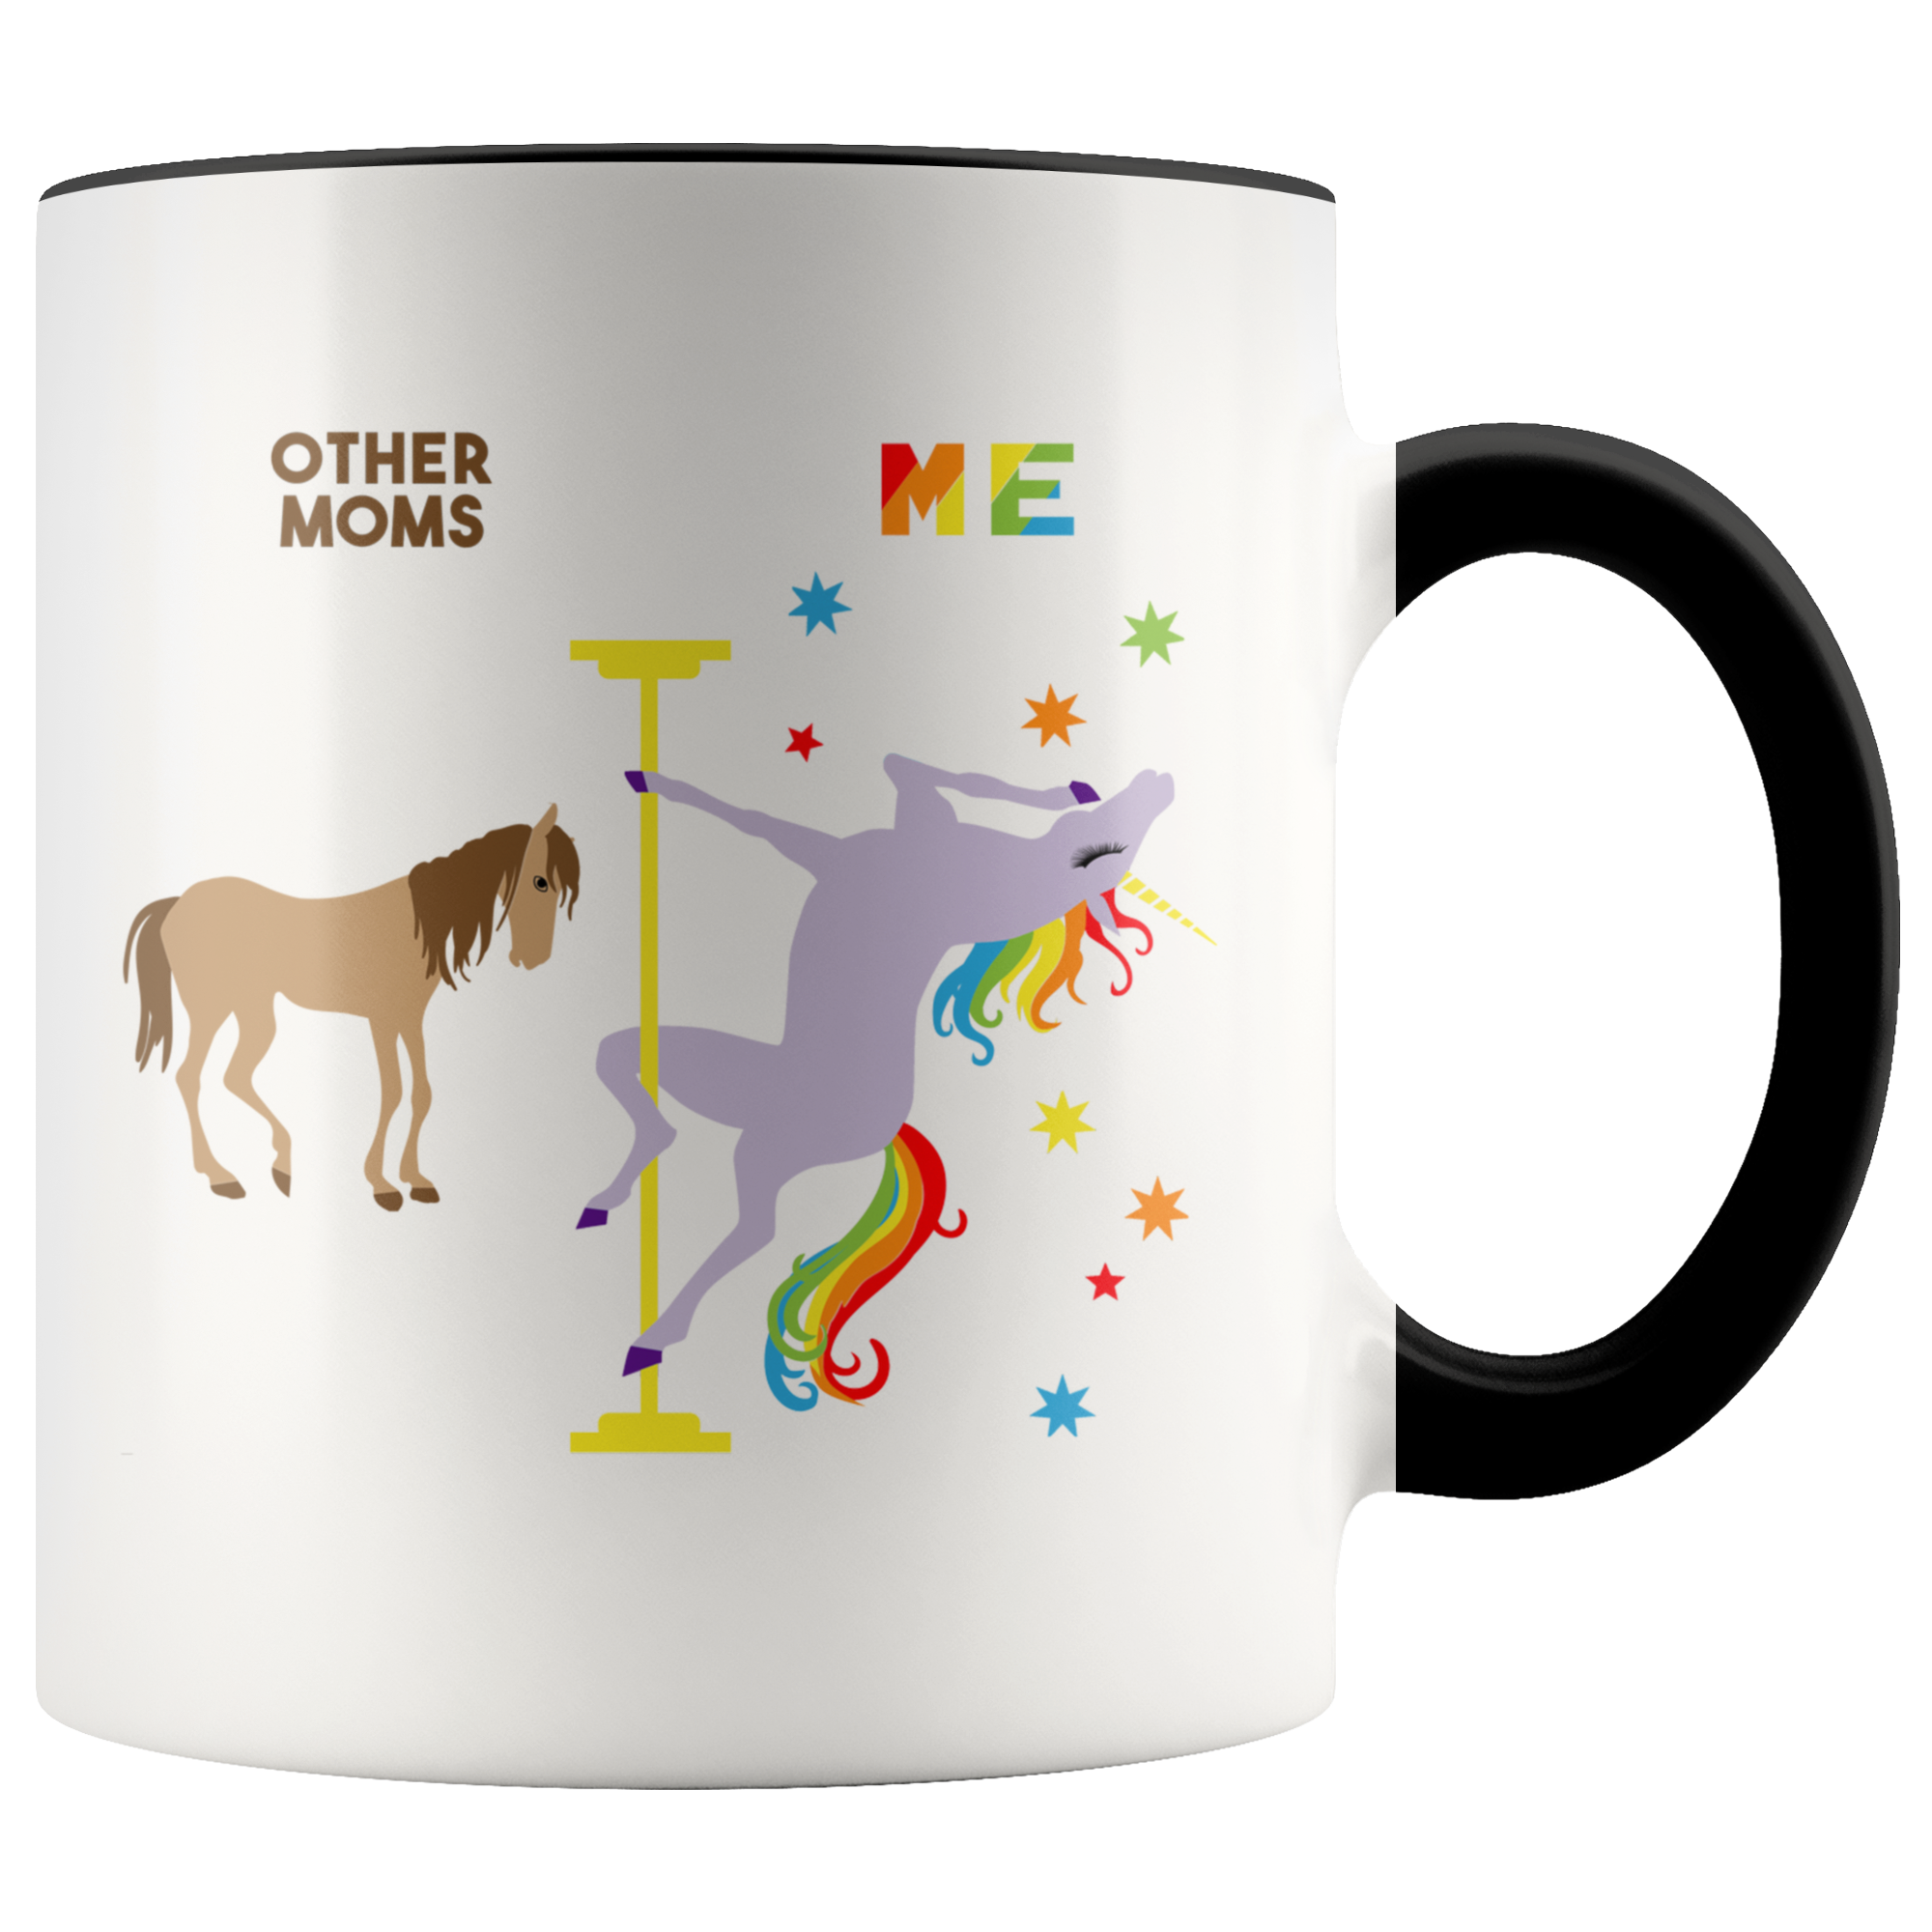 Pole Dancing Unicorn Mug Mom Mug Christmas Gift from Daughter Mom Gifts for Mom Gifts from Son Gift from Husband Gift from Kids Mom Coffee Cup Mother's Day Present